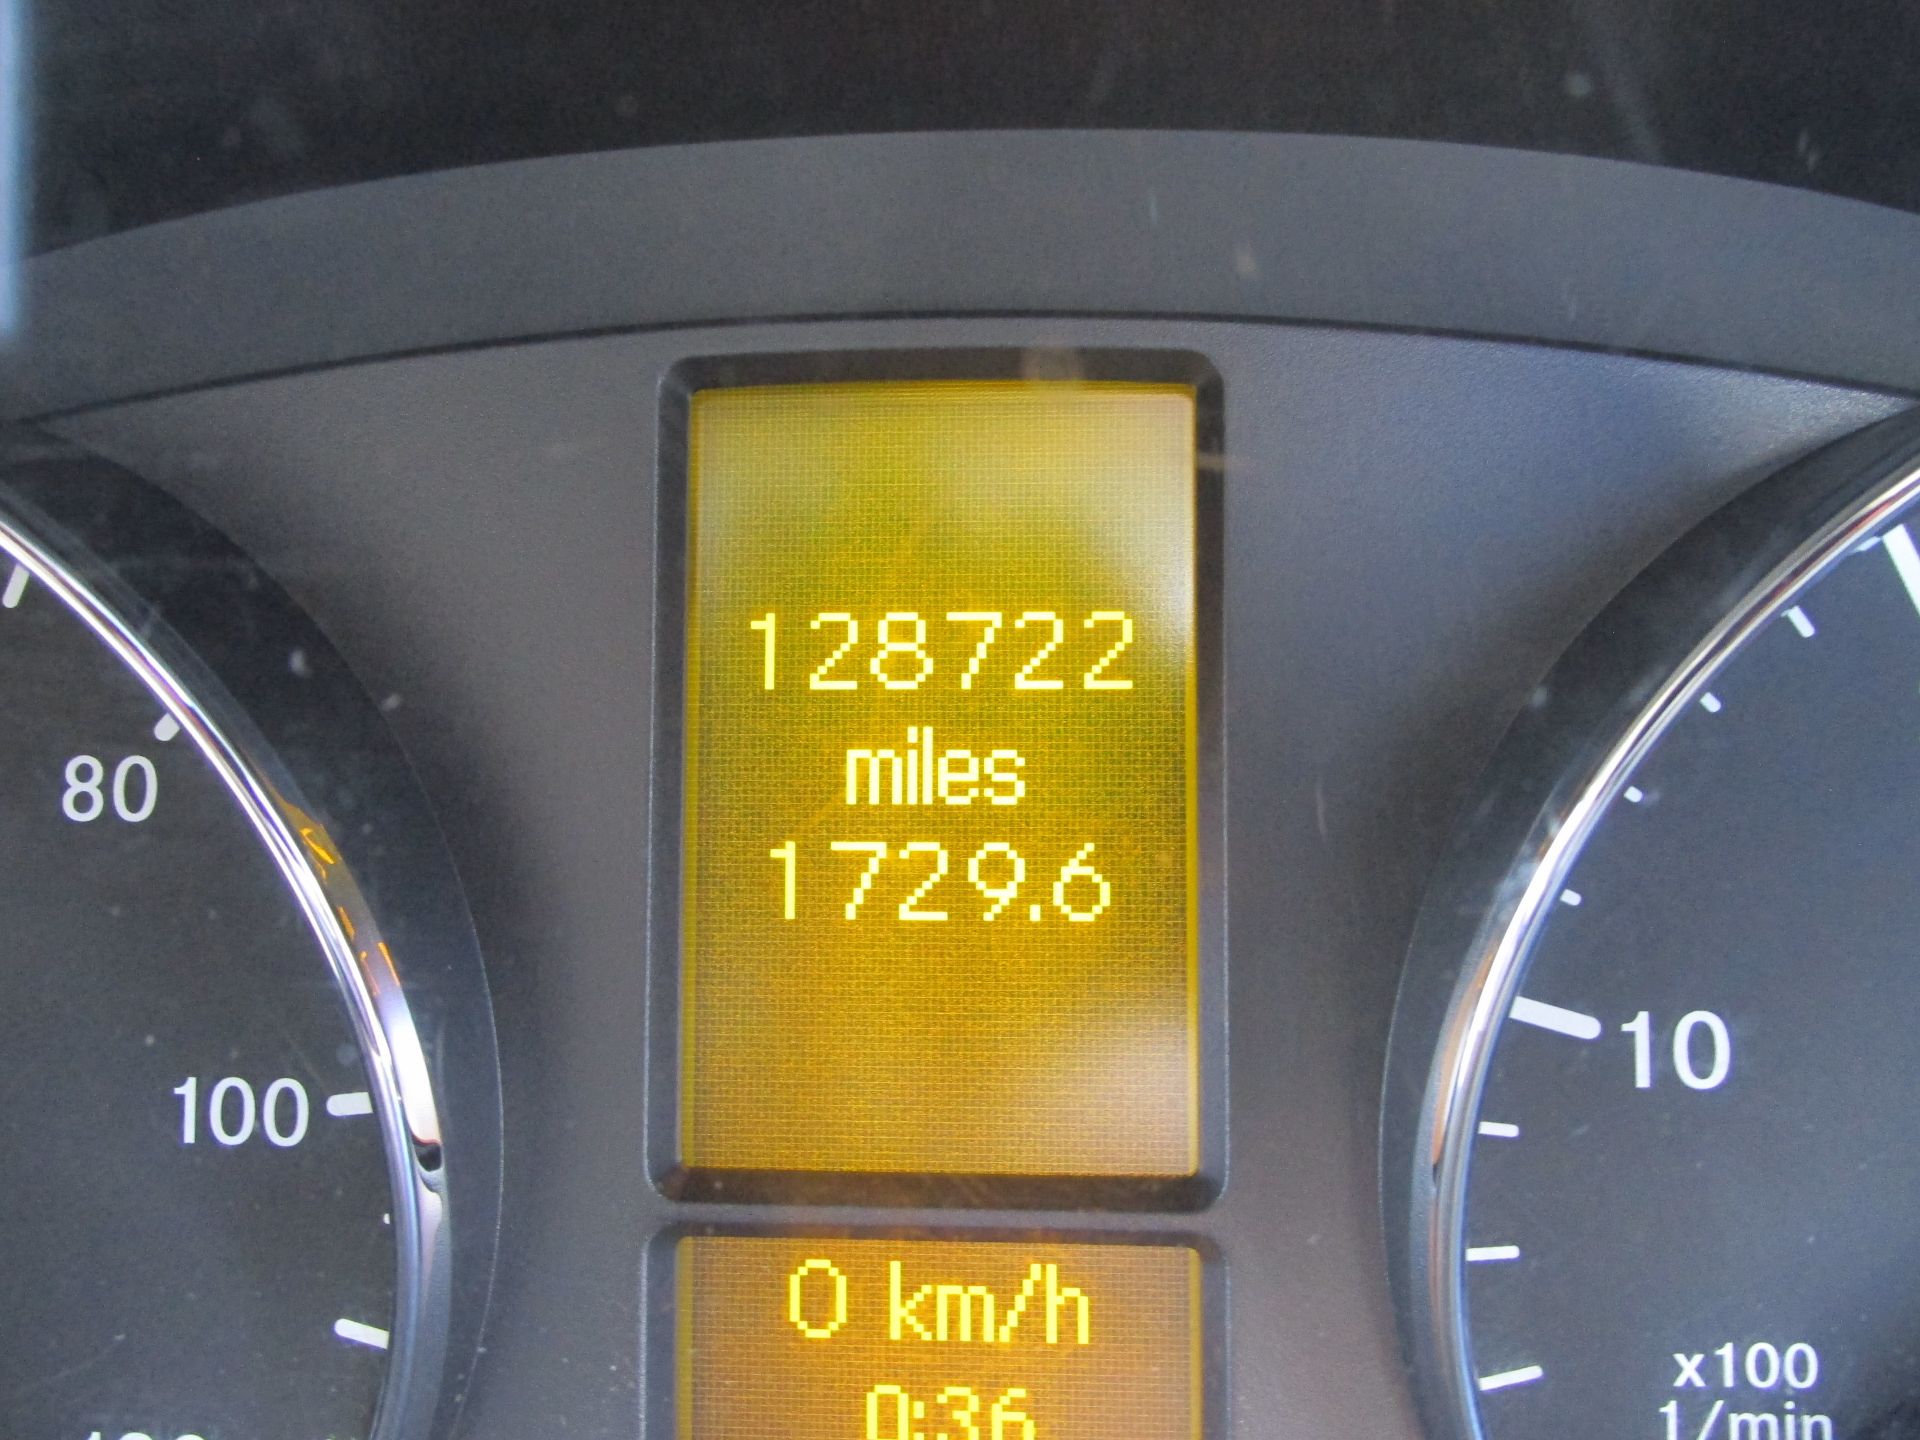 2014 Mercedes sprinter 313 Cdi dropside - 128630 Miles Warranted - Image 9 of 9